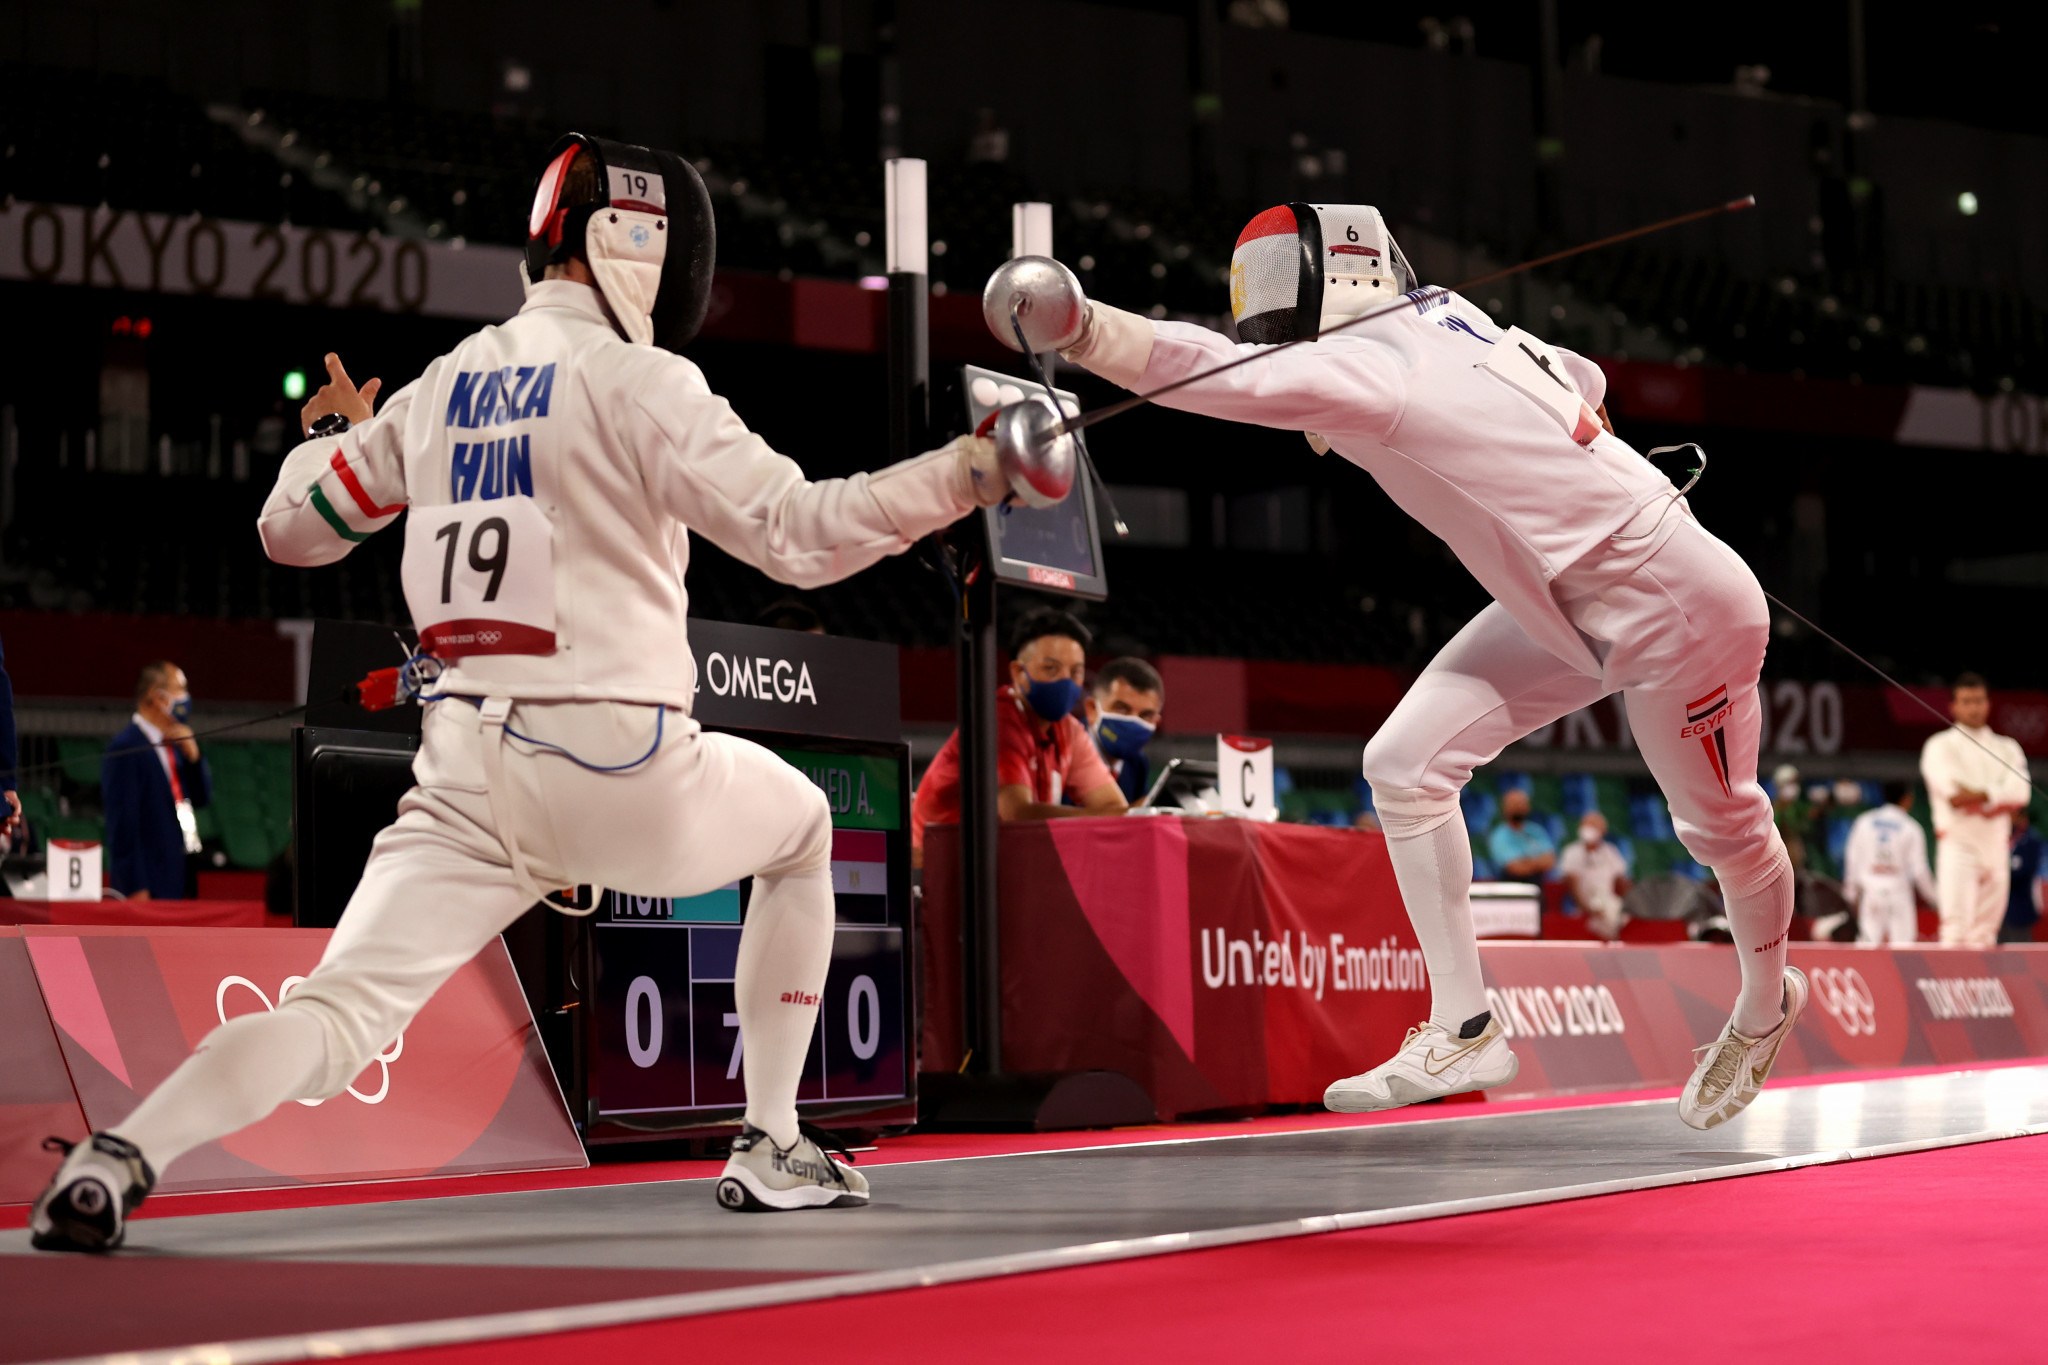 Five destinations have been confirmed for the Modern Pentathlon World Cup in 2022 ©Getty Images